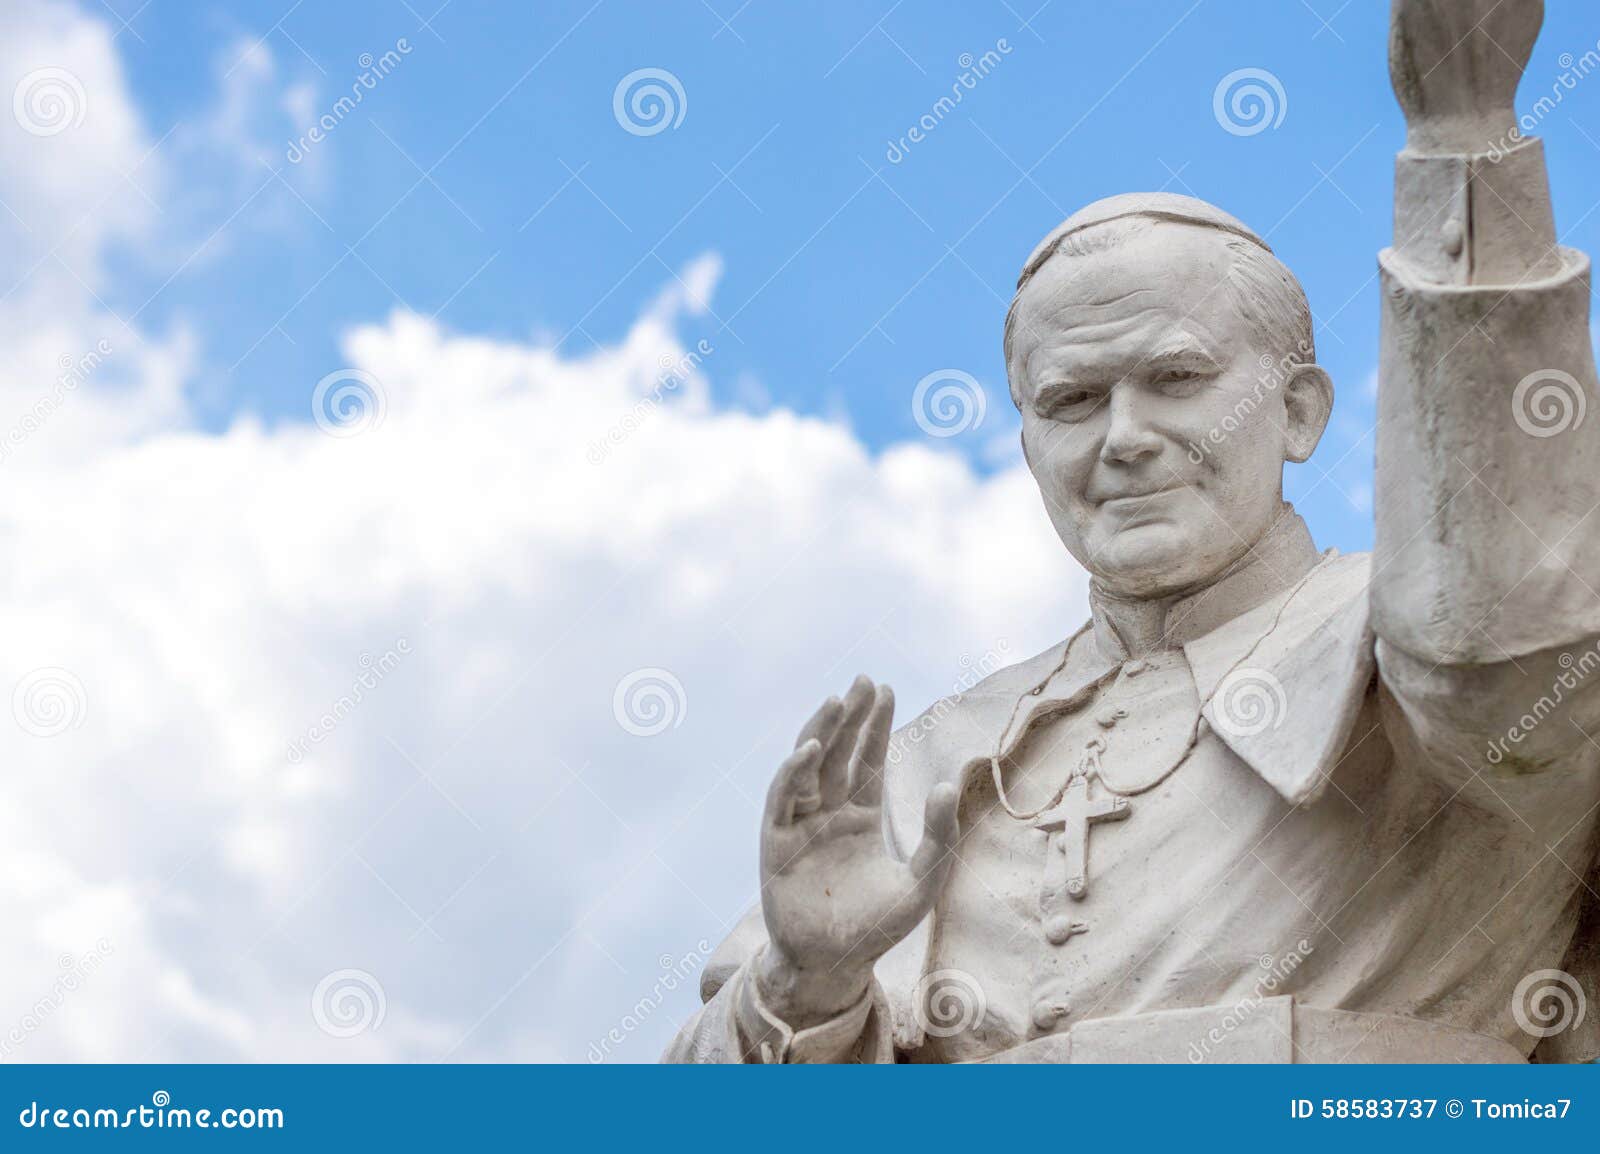 statue of pope john paul ii blessing people, with cloudy sky in